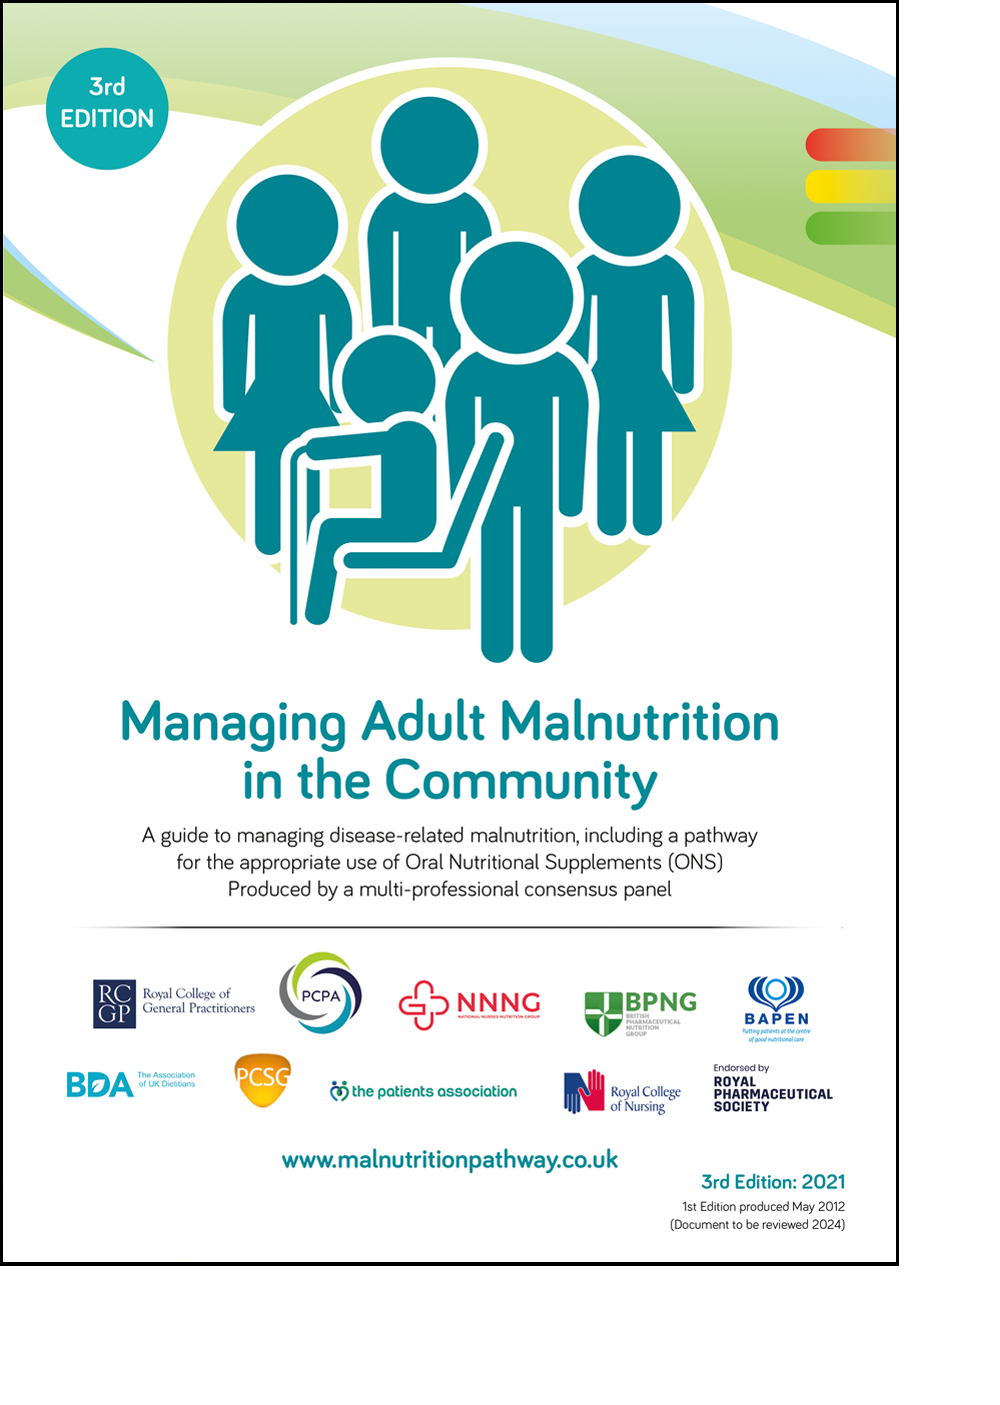 The term malnutrition can refer to both over and under nutrition. In this guide, malnutrition refers to under nutrition